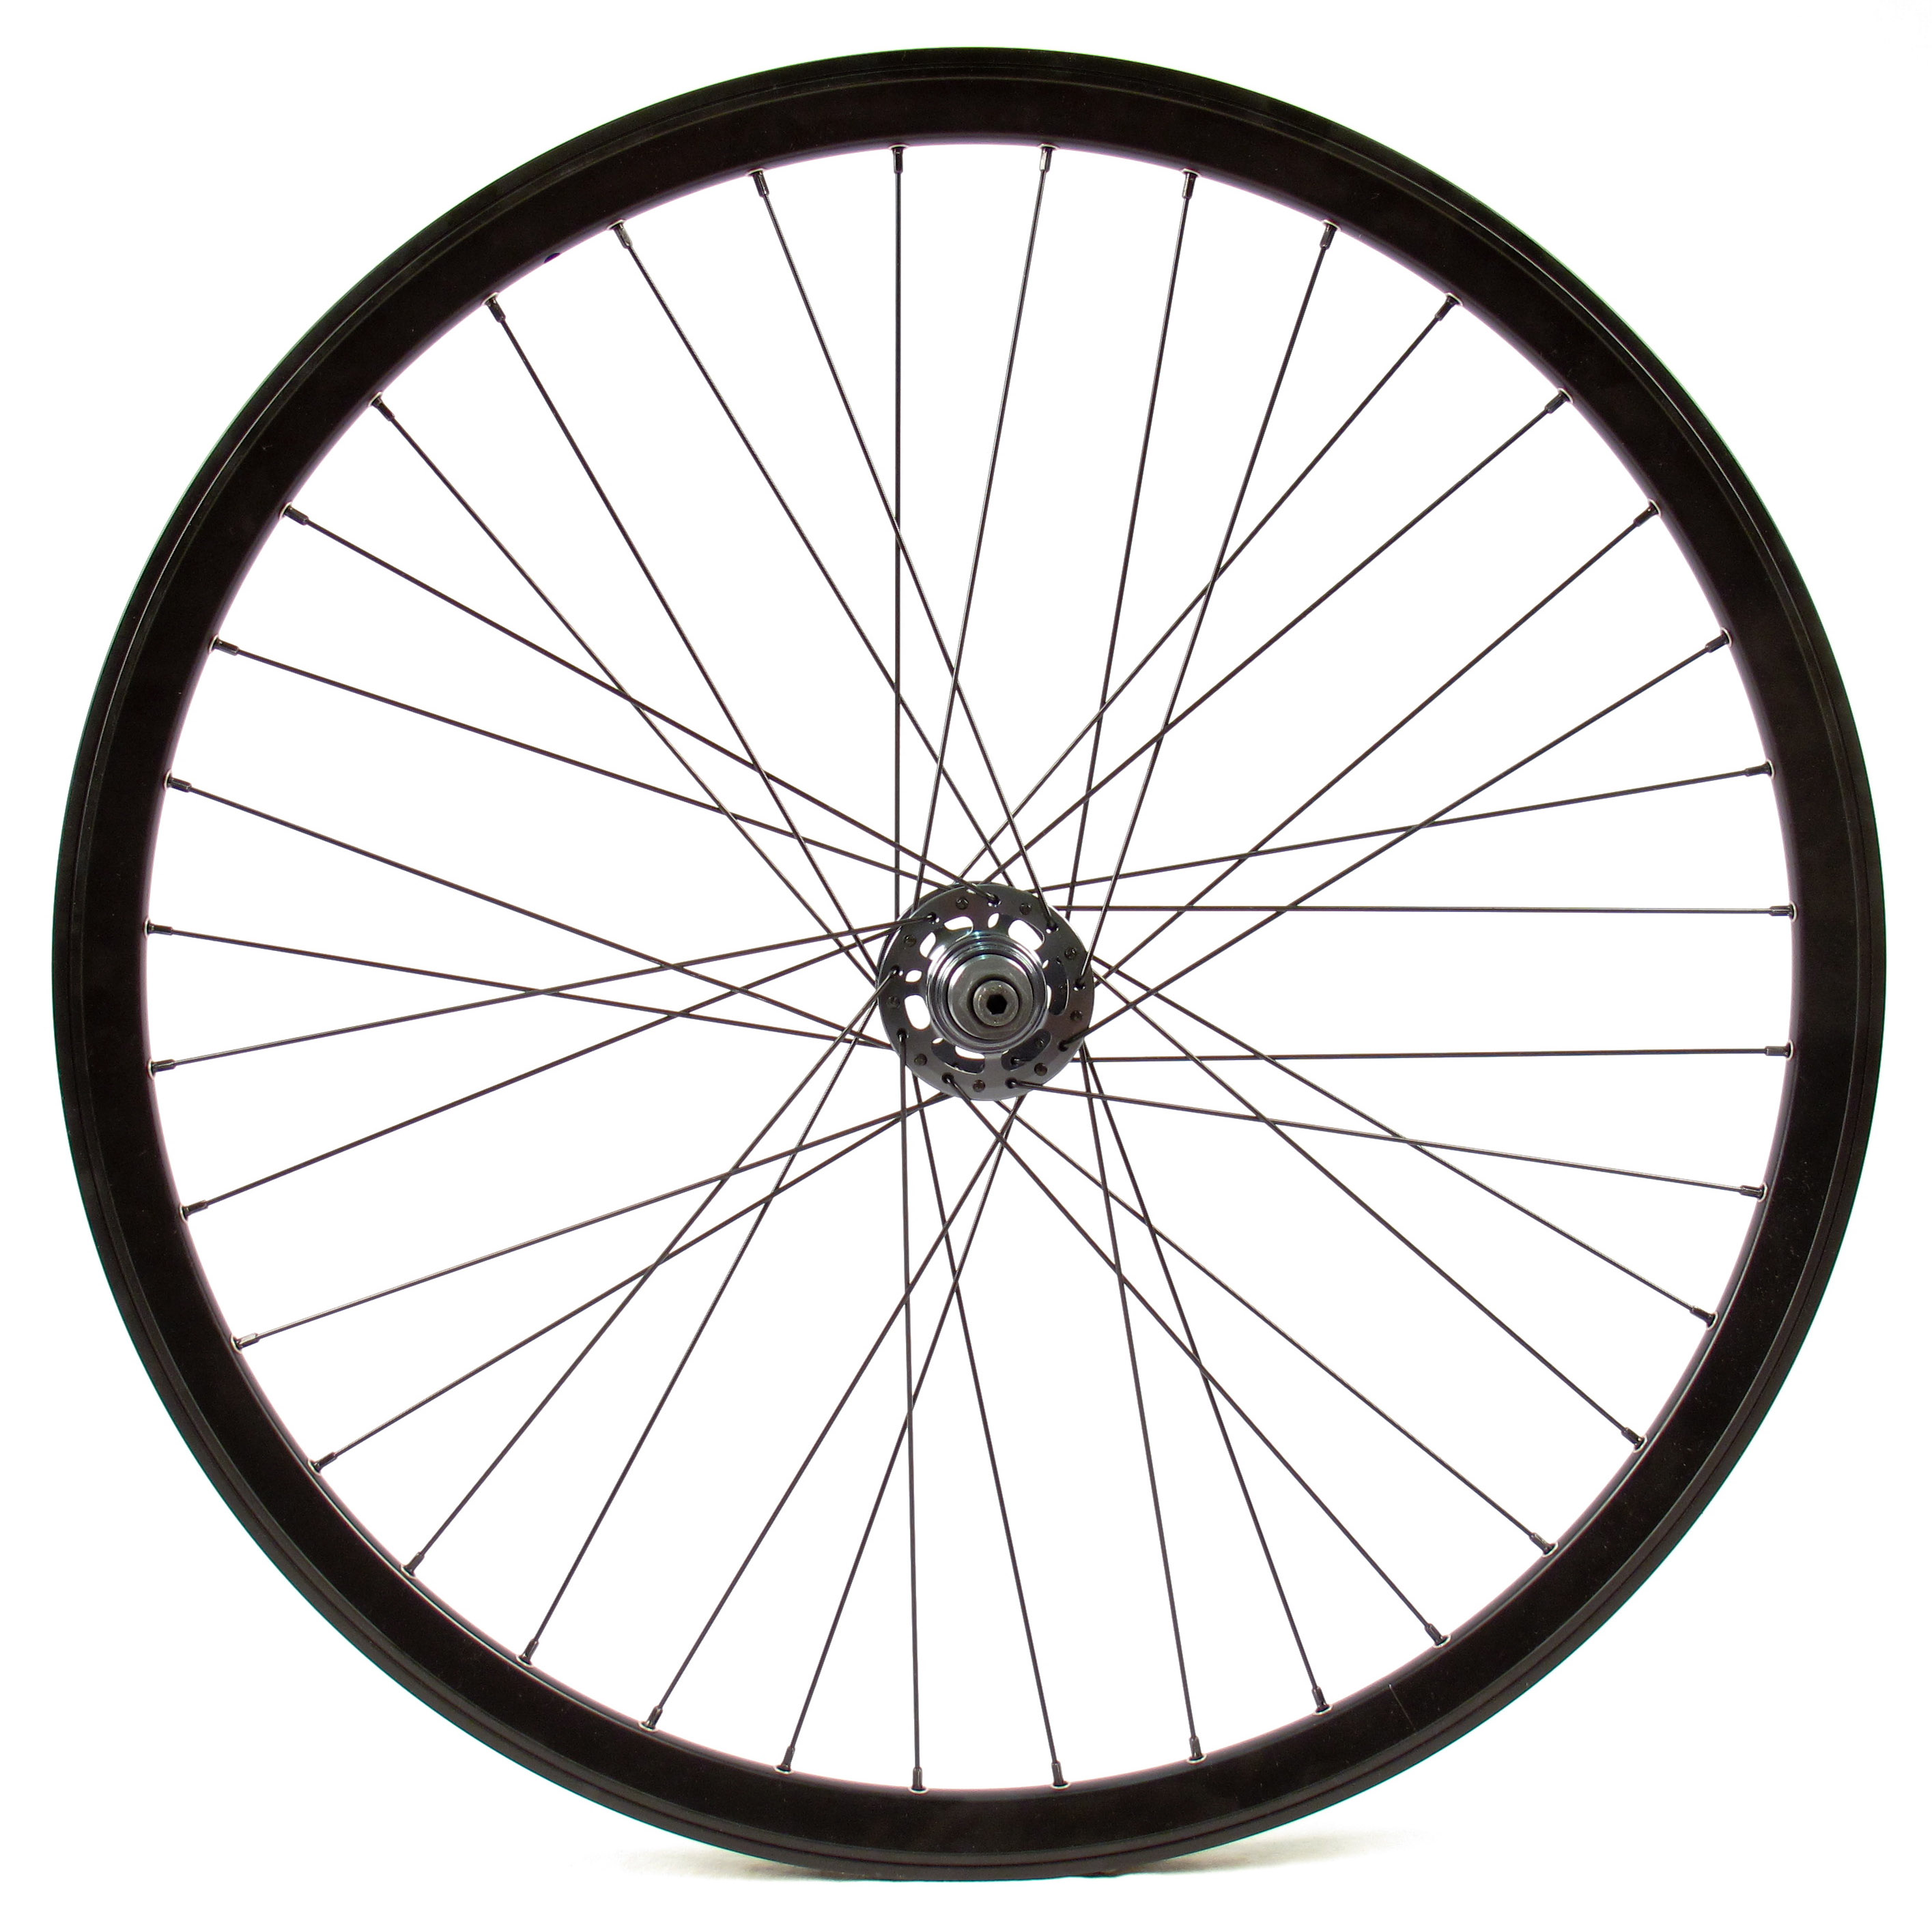 A History of Cycling in n+1 Objects: No. 1 – The Wire Spoked Wheel ...